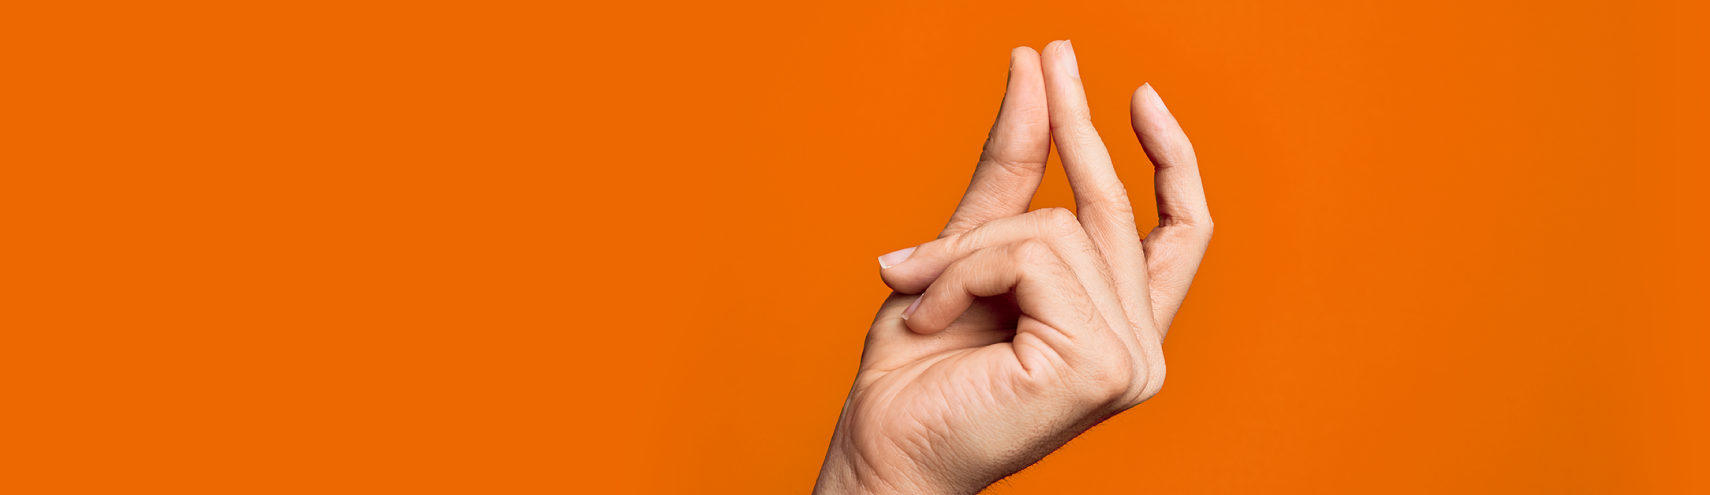 Orange background with a finger that's about to snap